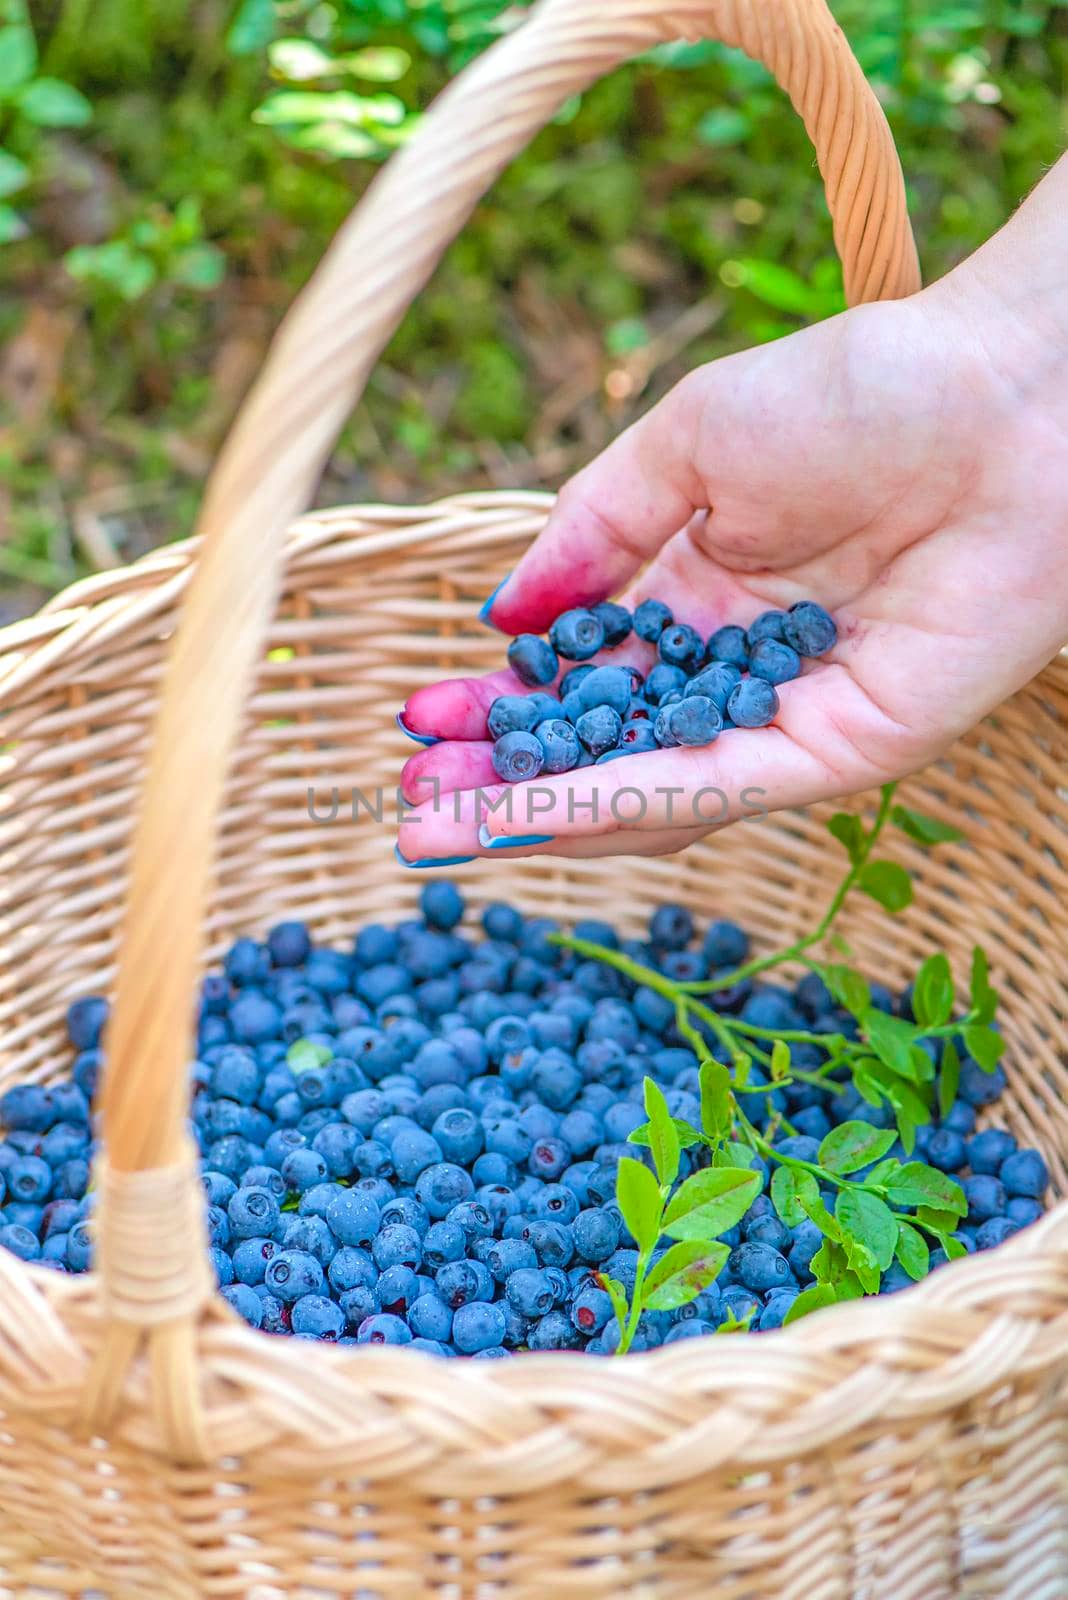 Berry season. Ripe blueberries in a basket. The process of finding and collecting blueberries in the forest during the ripening period. Hand pouring harvested blueberries into a basket by SERSOL